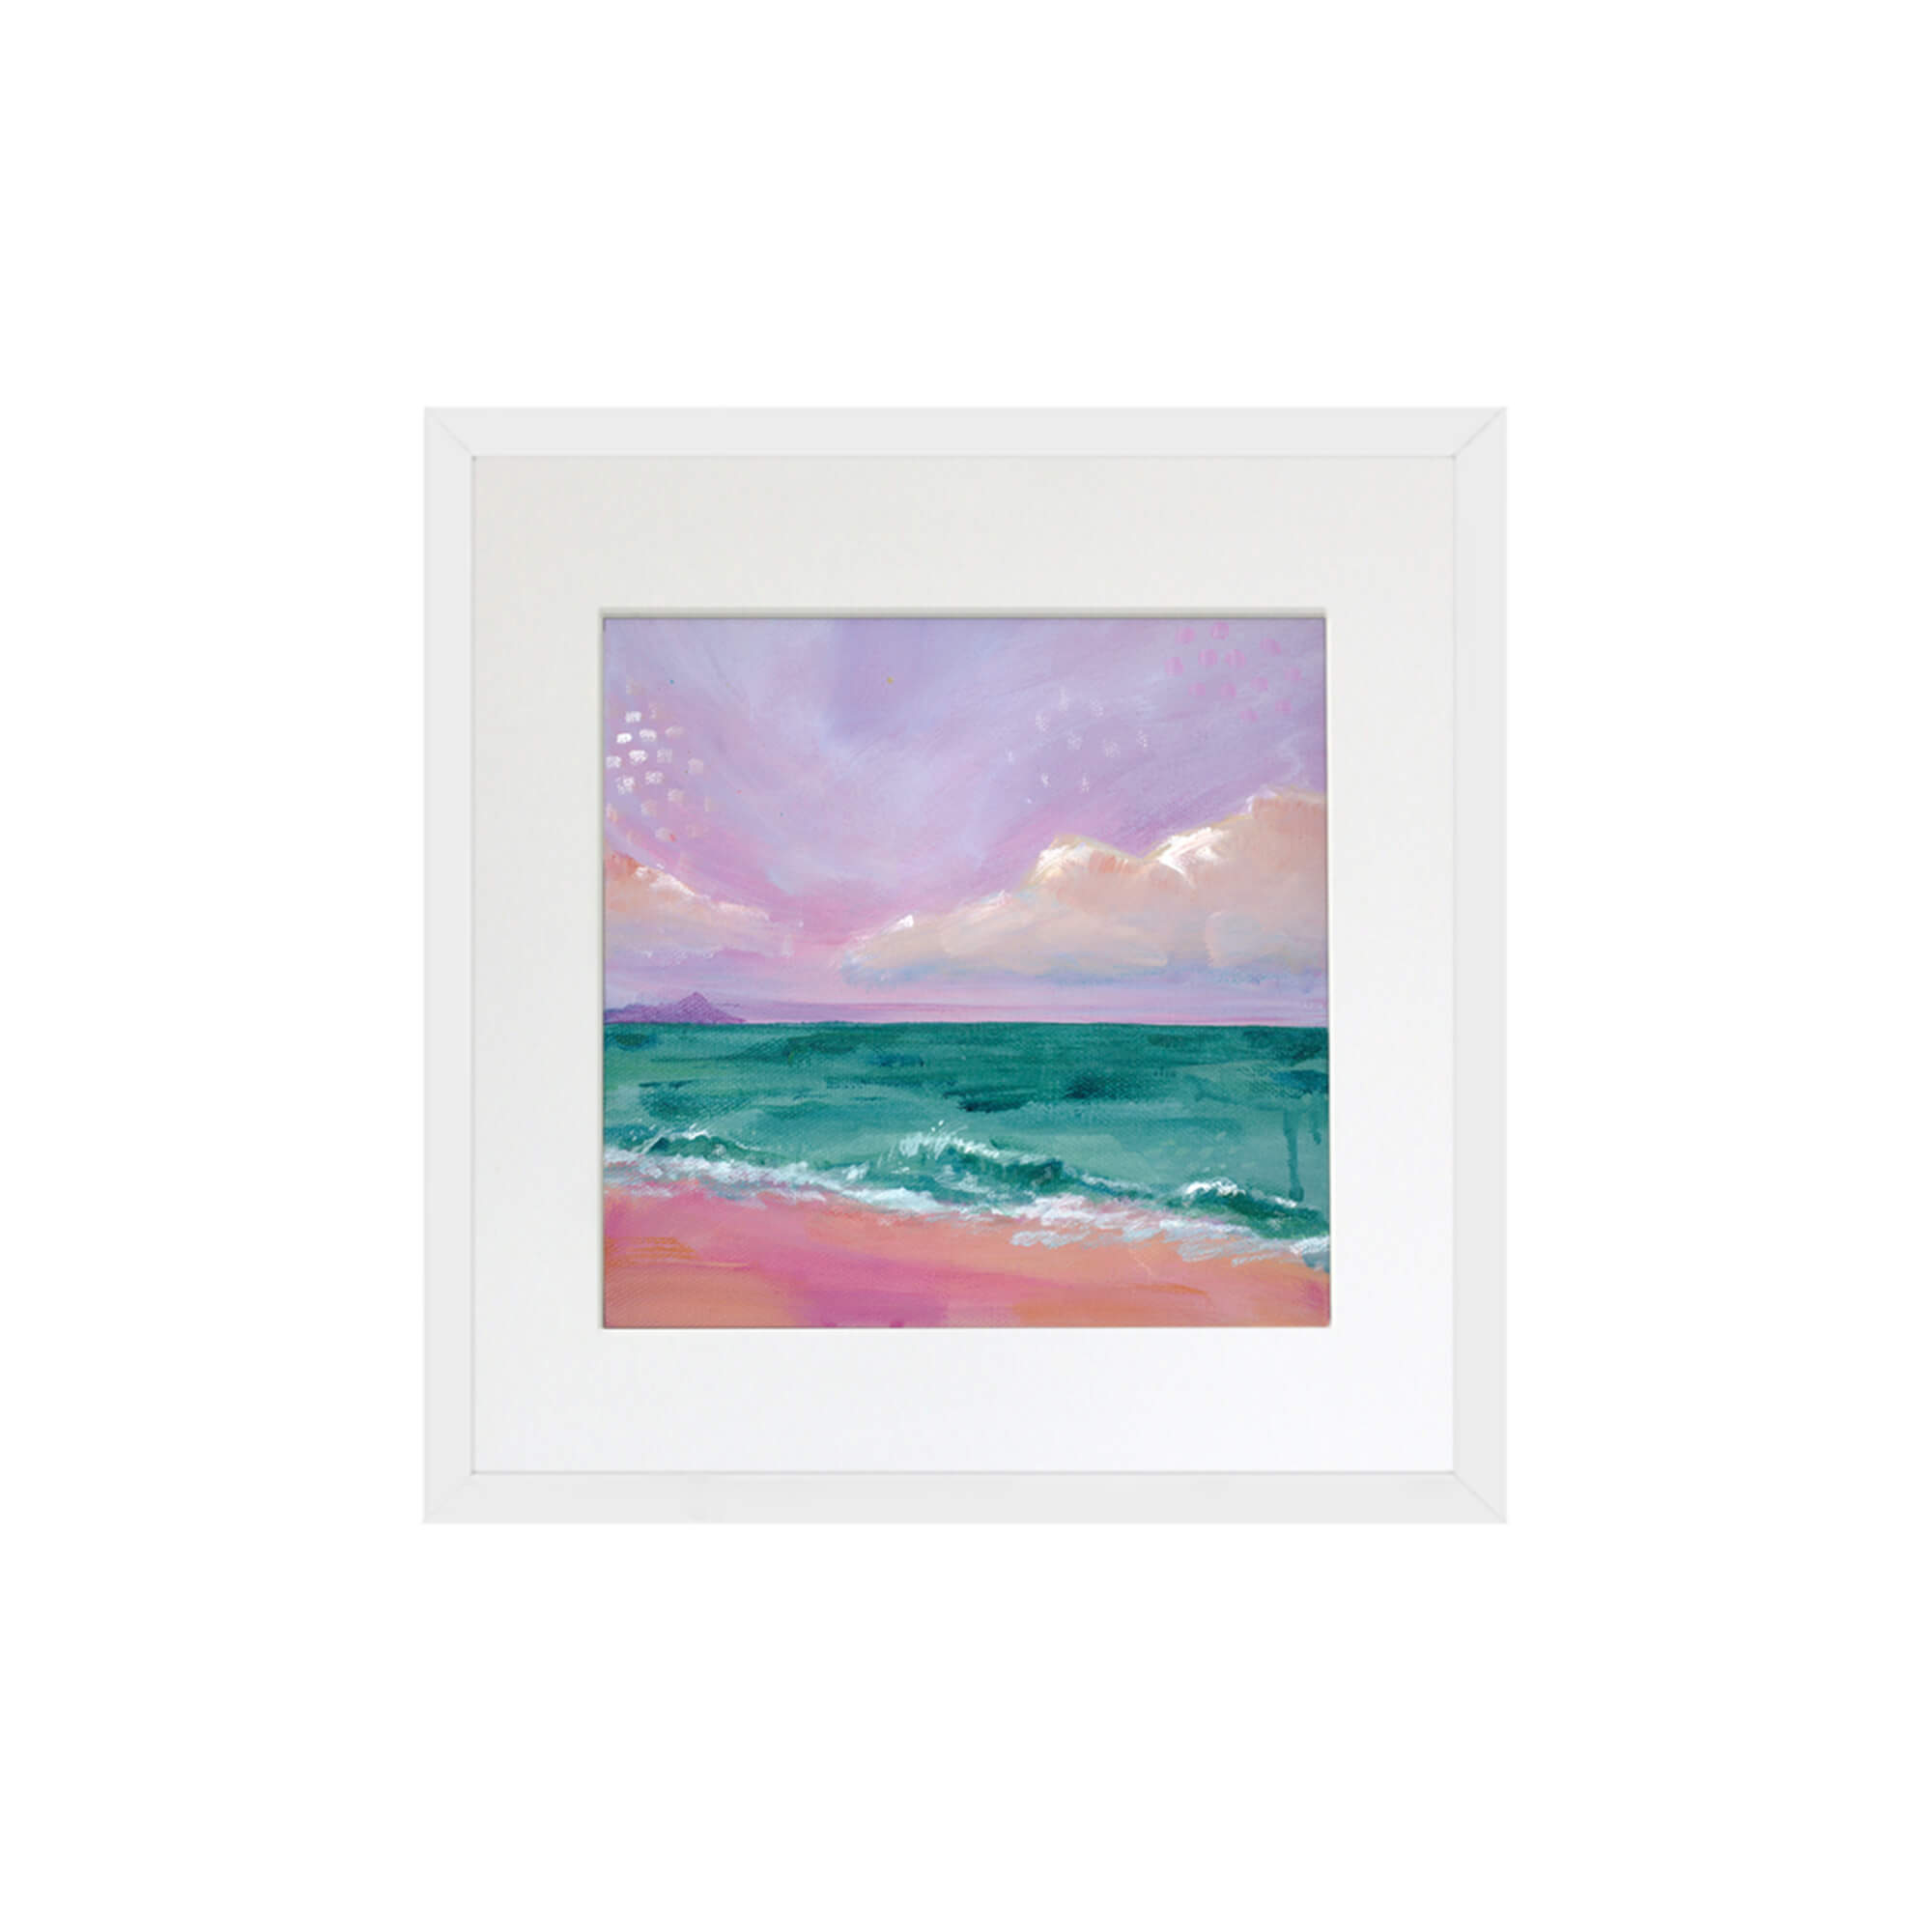 A seascape and horizon with lavender sky by Hawaii artist Lindsay Wilkins 